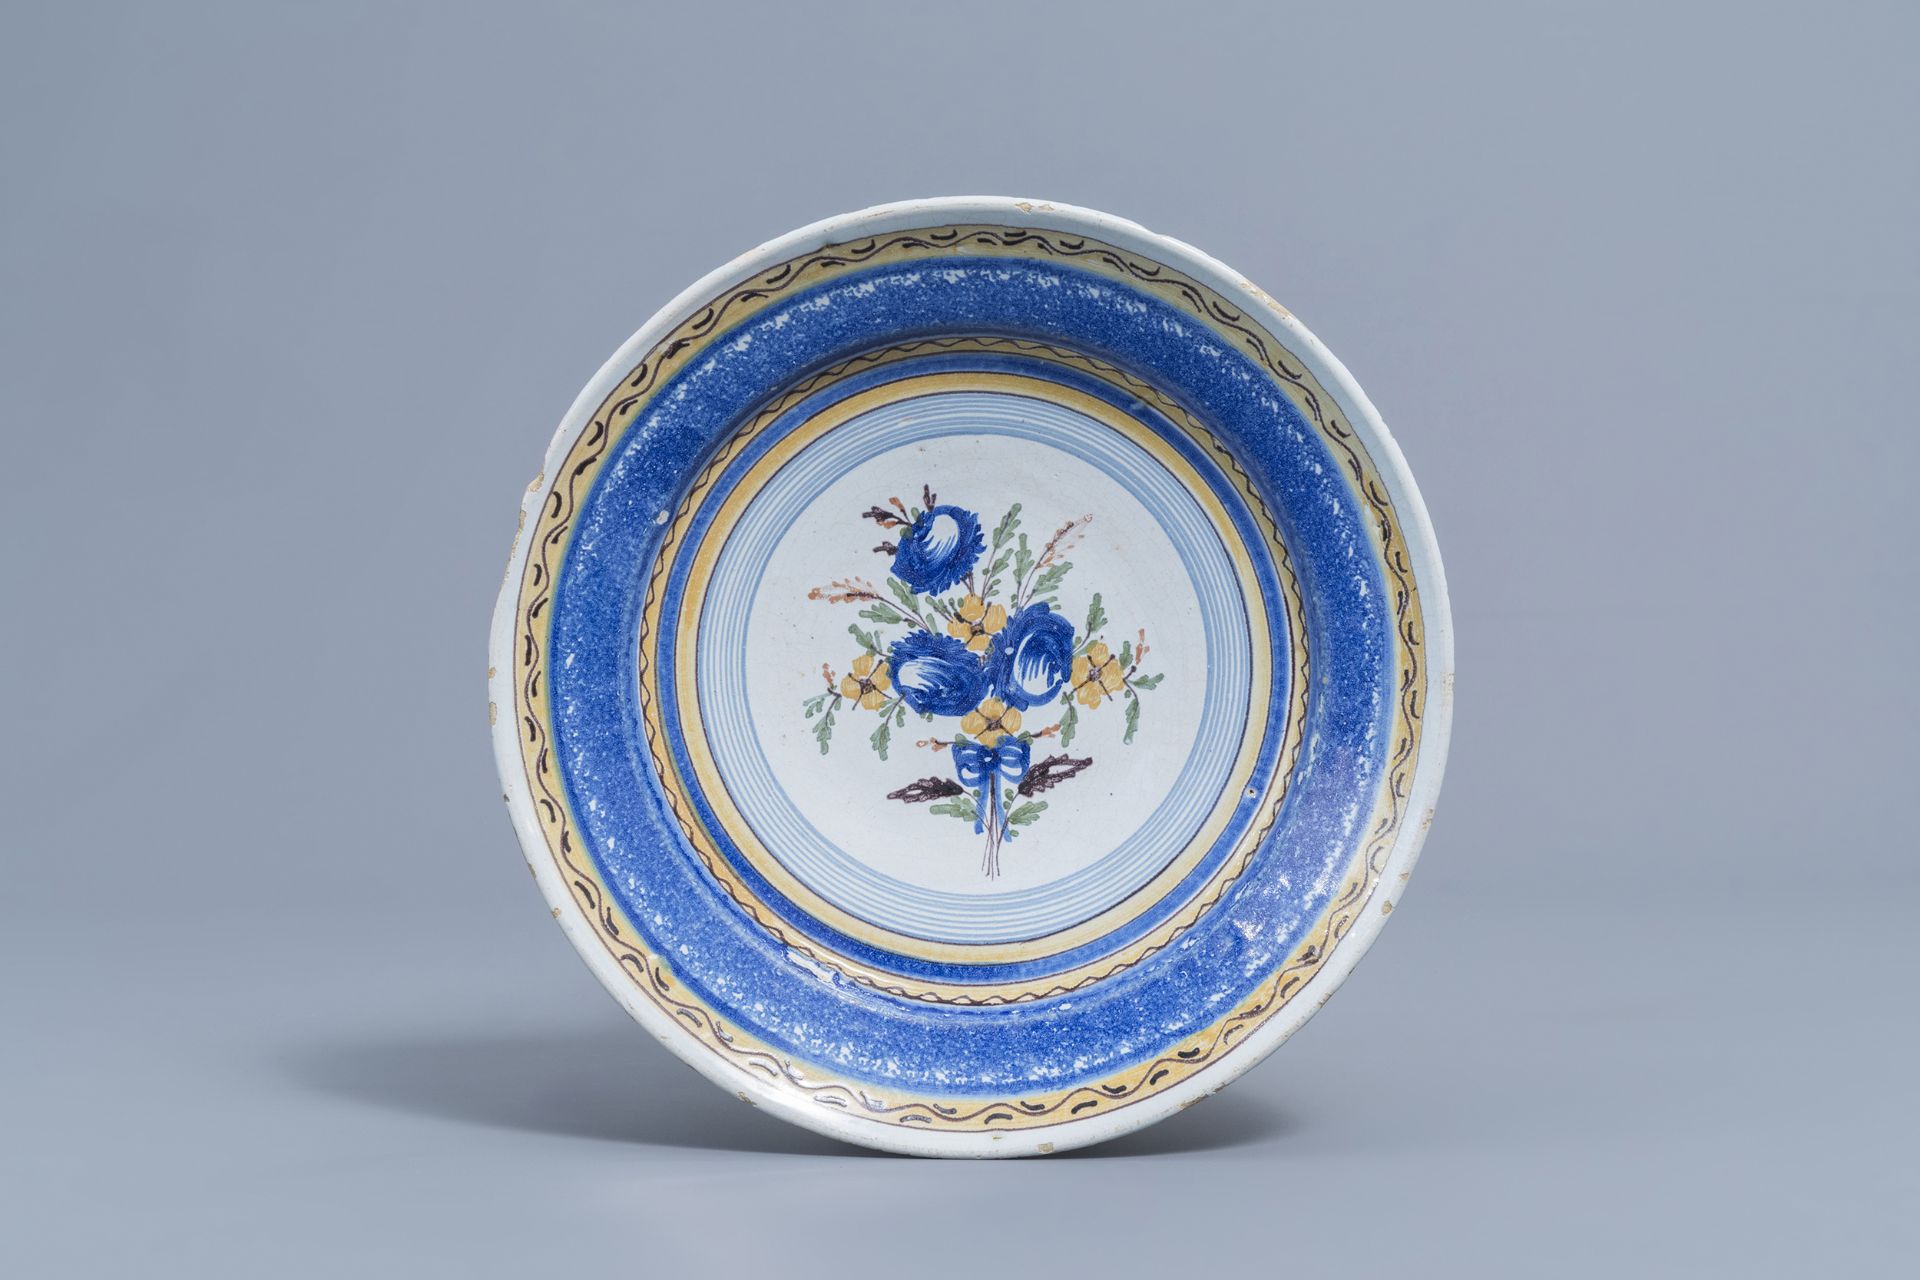 Five polychrome Brussels faience plates with floral design, 18th/19th C. - Image 9 of 12